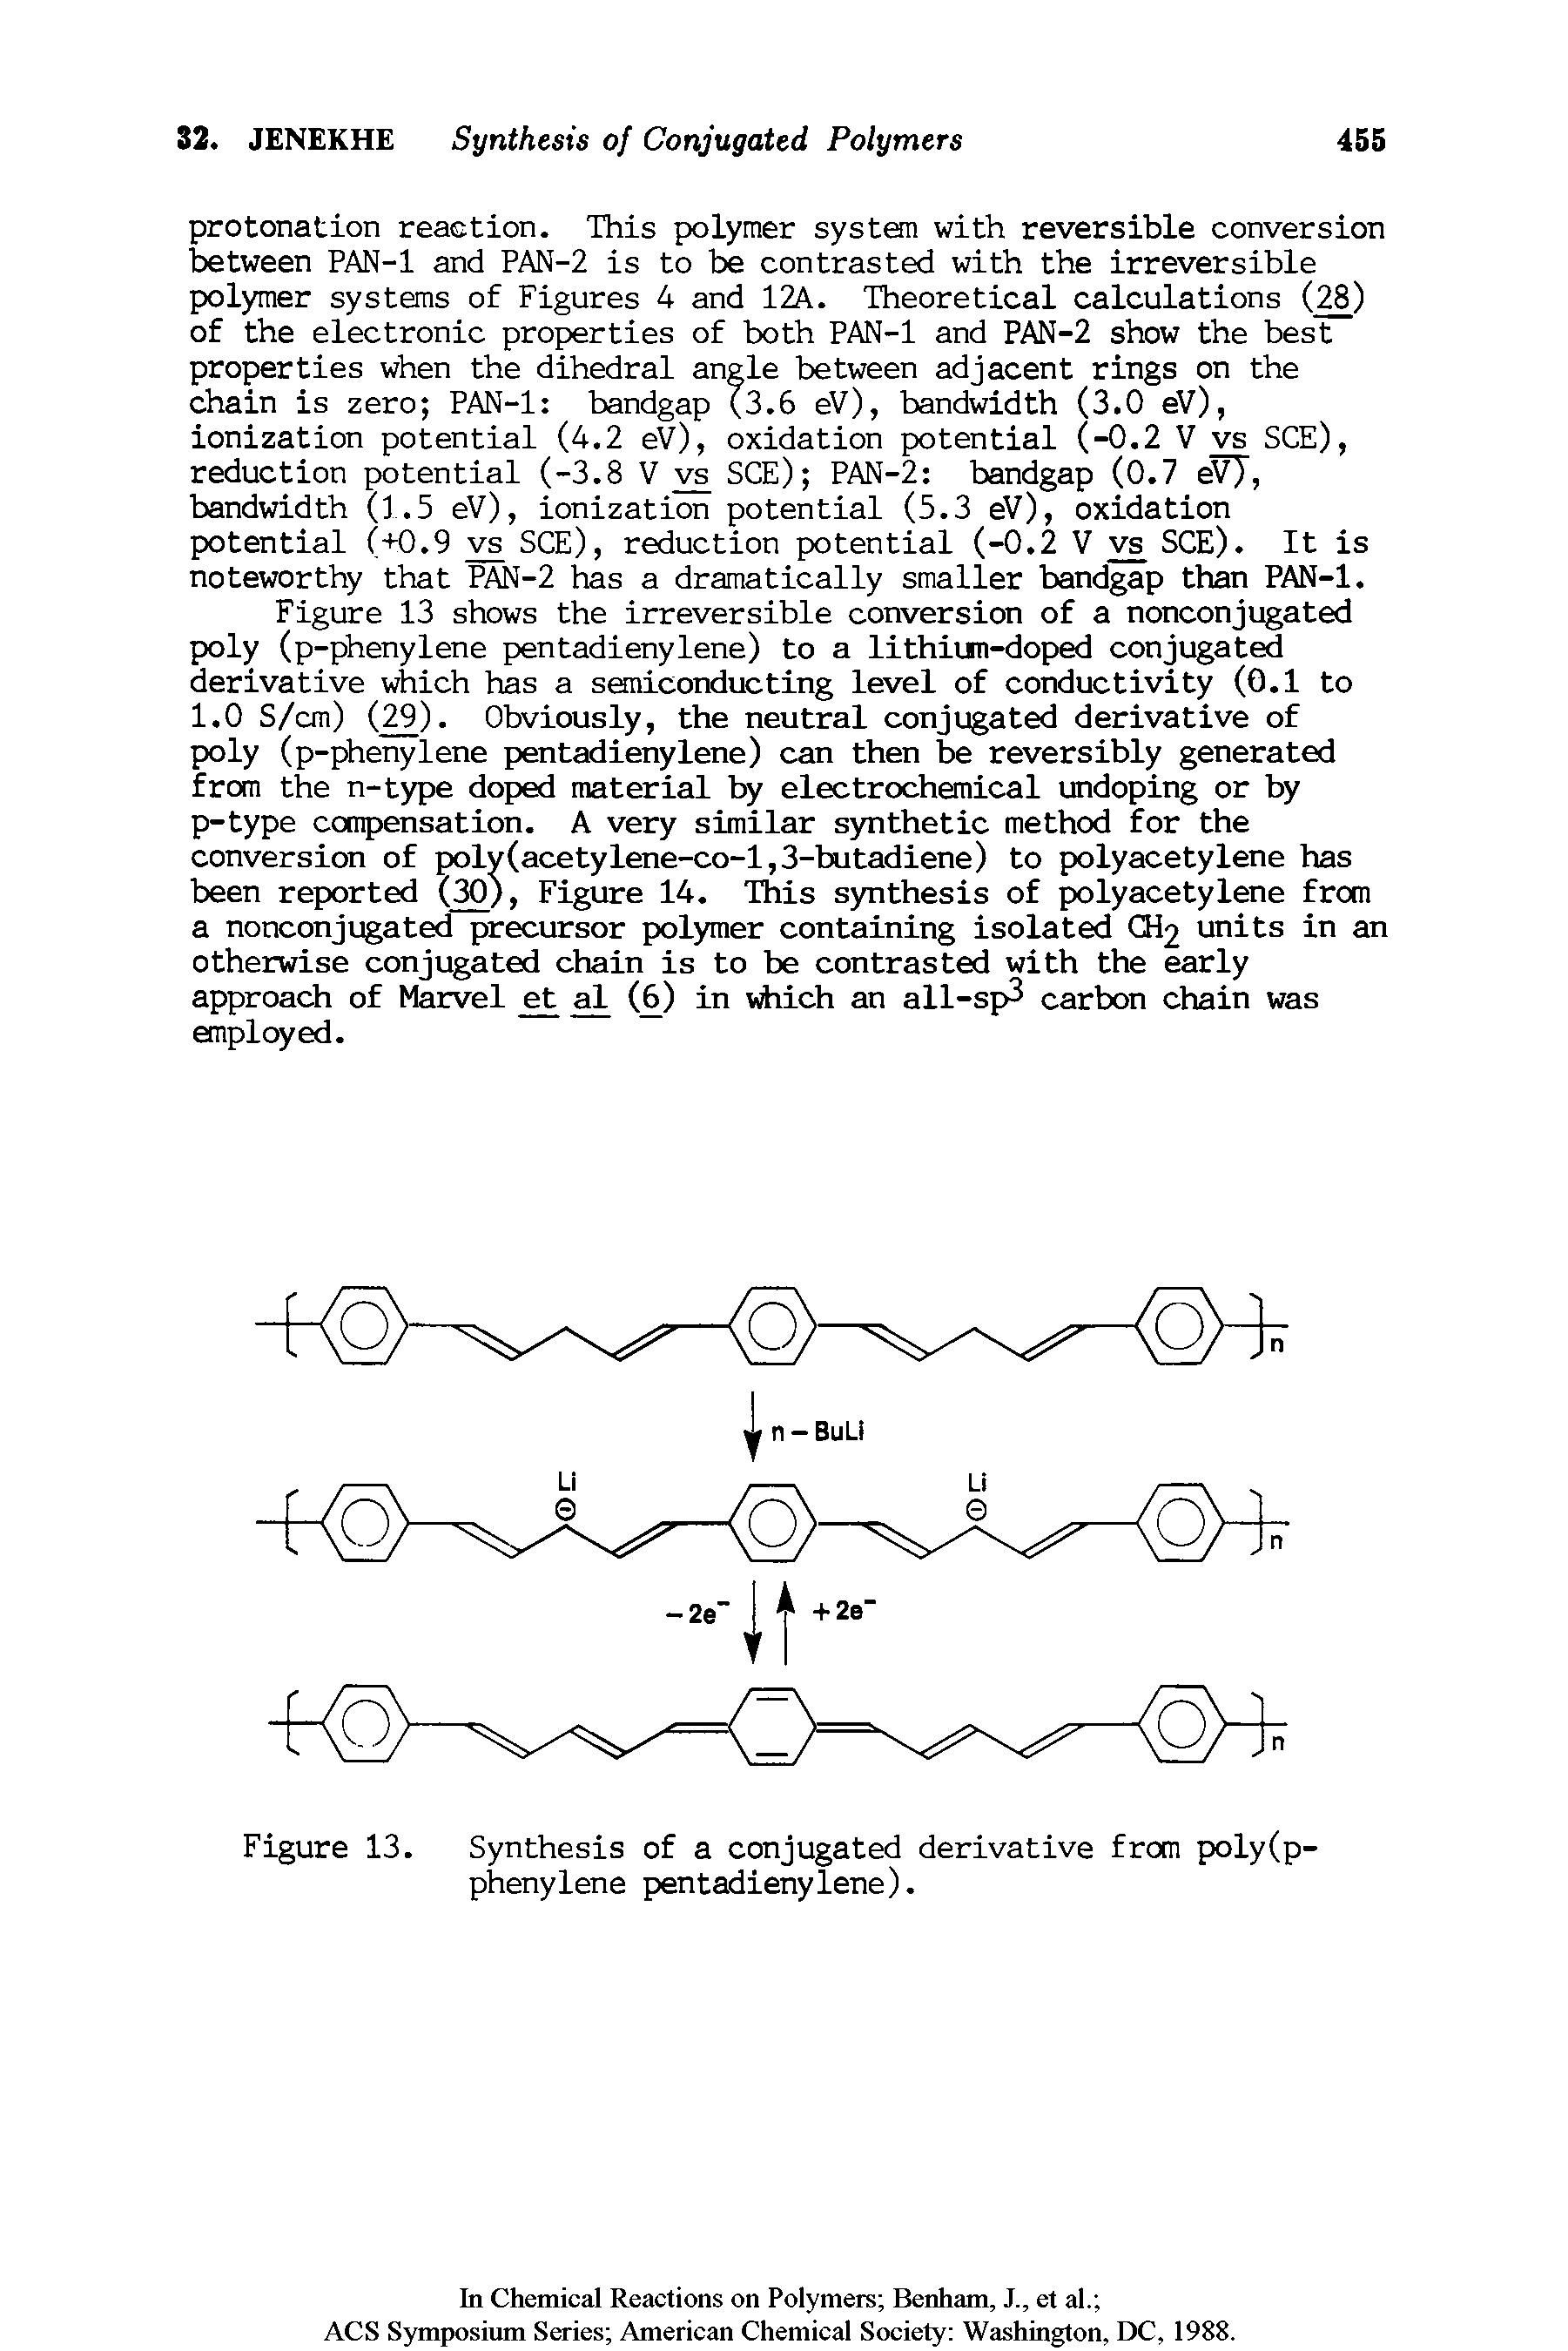 Figure 13 shows the irreversible conversion of a nonconjugated poly (p-phenylene pentadienylene) to a lithiun-doped conjugated derivative which has a semiconducting level of conductivity (0.1 to 1.0 S/cm) (29). Obviously, the neutral conjugated derivative of poly (p-phenylene pentadienylene) can then be reversibly generated from the n-type doped material by electrochemical undoping or by p-type compensation. A very similar synthetic method for the conversion of poly(acetylene-co-1,3-butadiene) to polyacetylene has been reported (30), Figure 14. This synthesis of polyacetylene from a nonconjugated precursor polymer containing isolated CH2 units in an otherwise conjugated chain is to be contrasted with the early approach of Marvel et al (6) in which an all-sp3 carbon chain was employed.